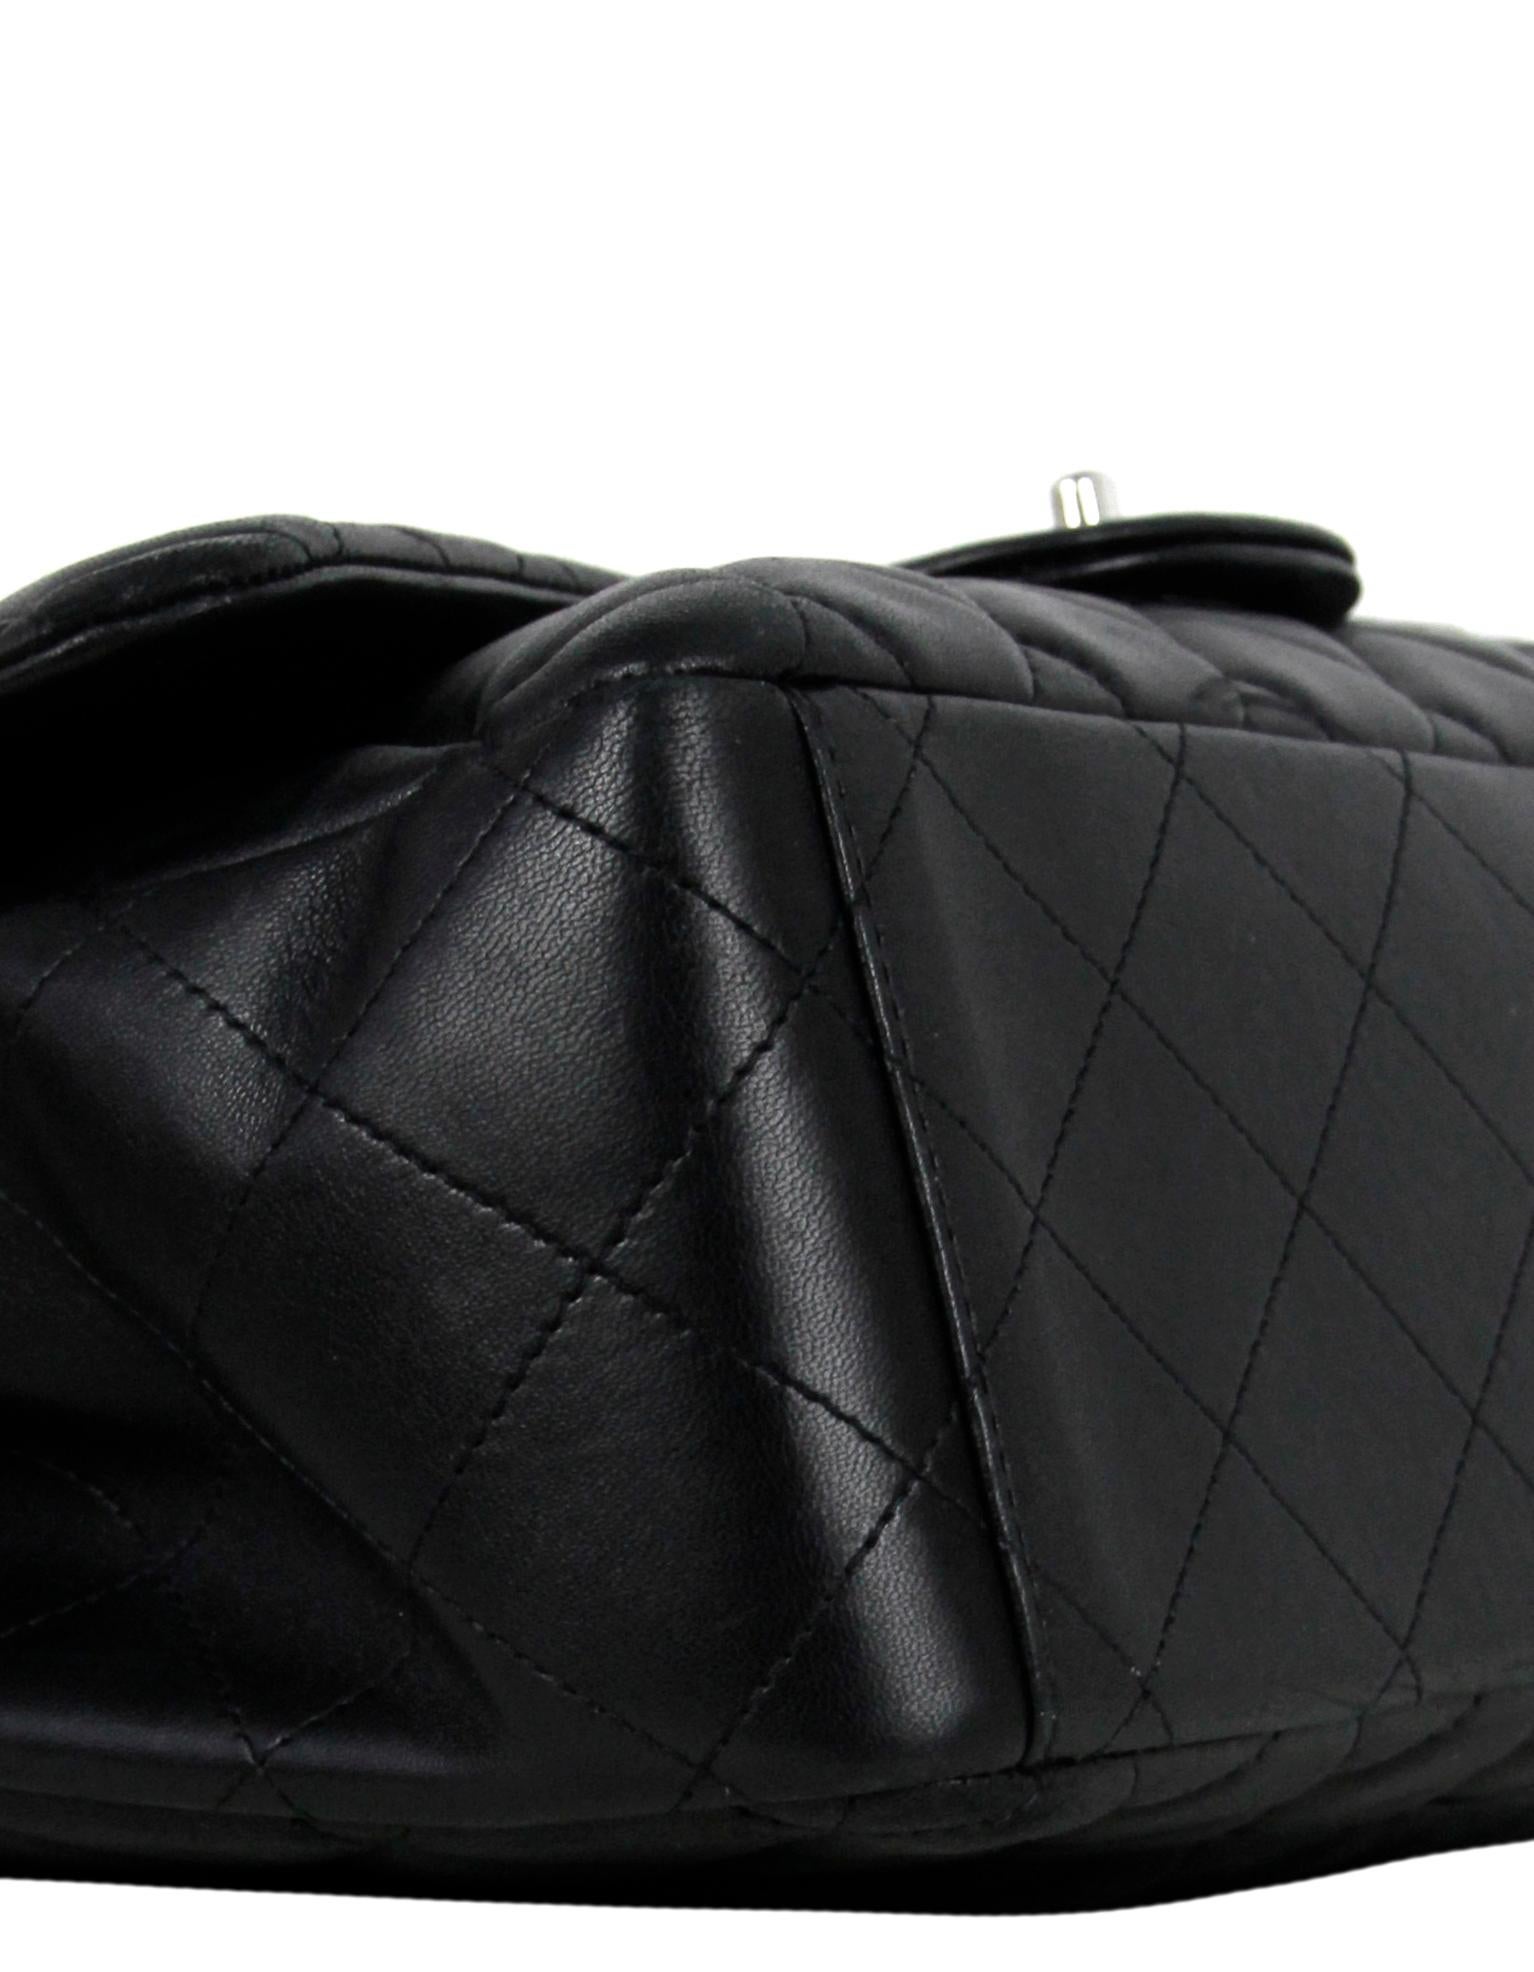 Chanel Black Lambskin Leather Quilted Single Flap Maxi Bag For Sale 6